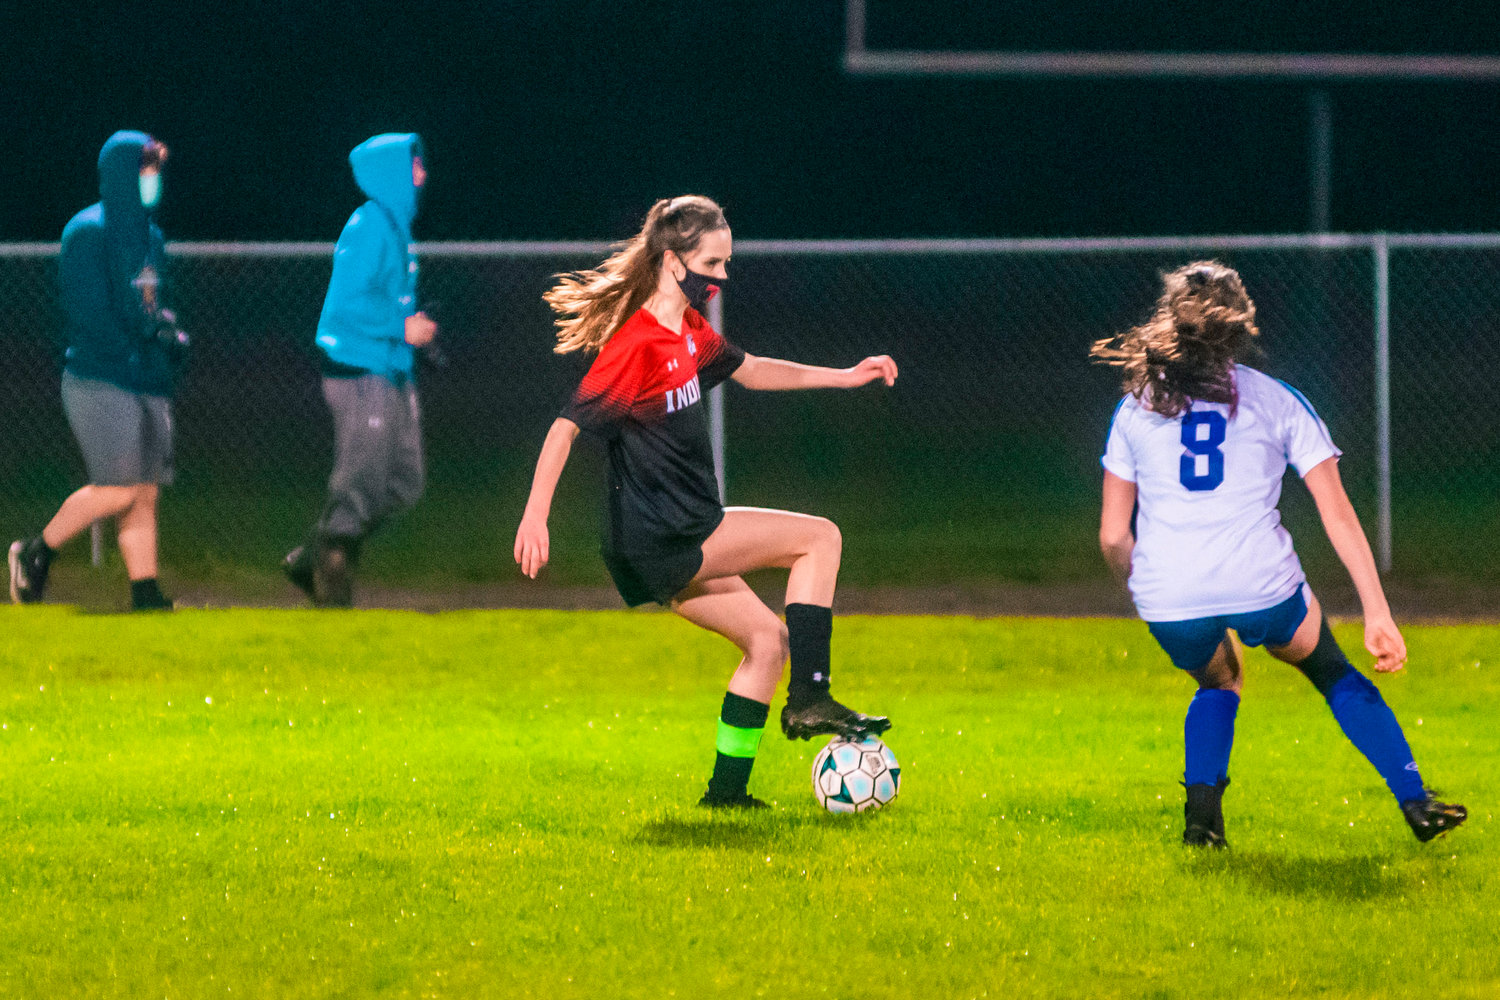 Toledo’s Marina Smith (9) takes the ball down field during a soccer game against Onalaska Monday night.